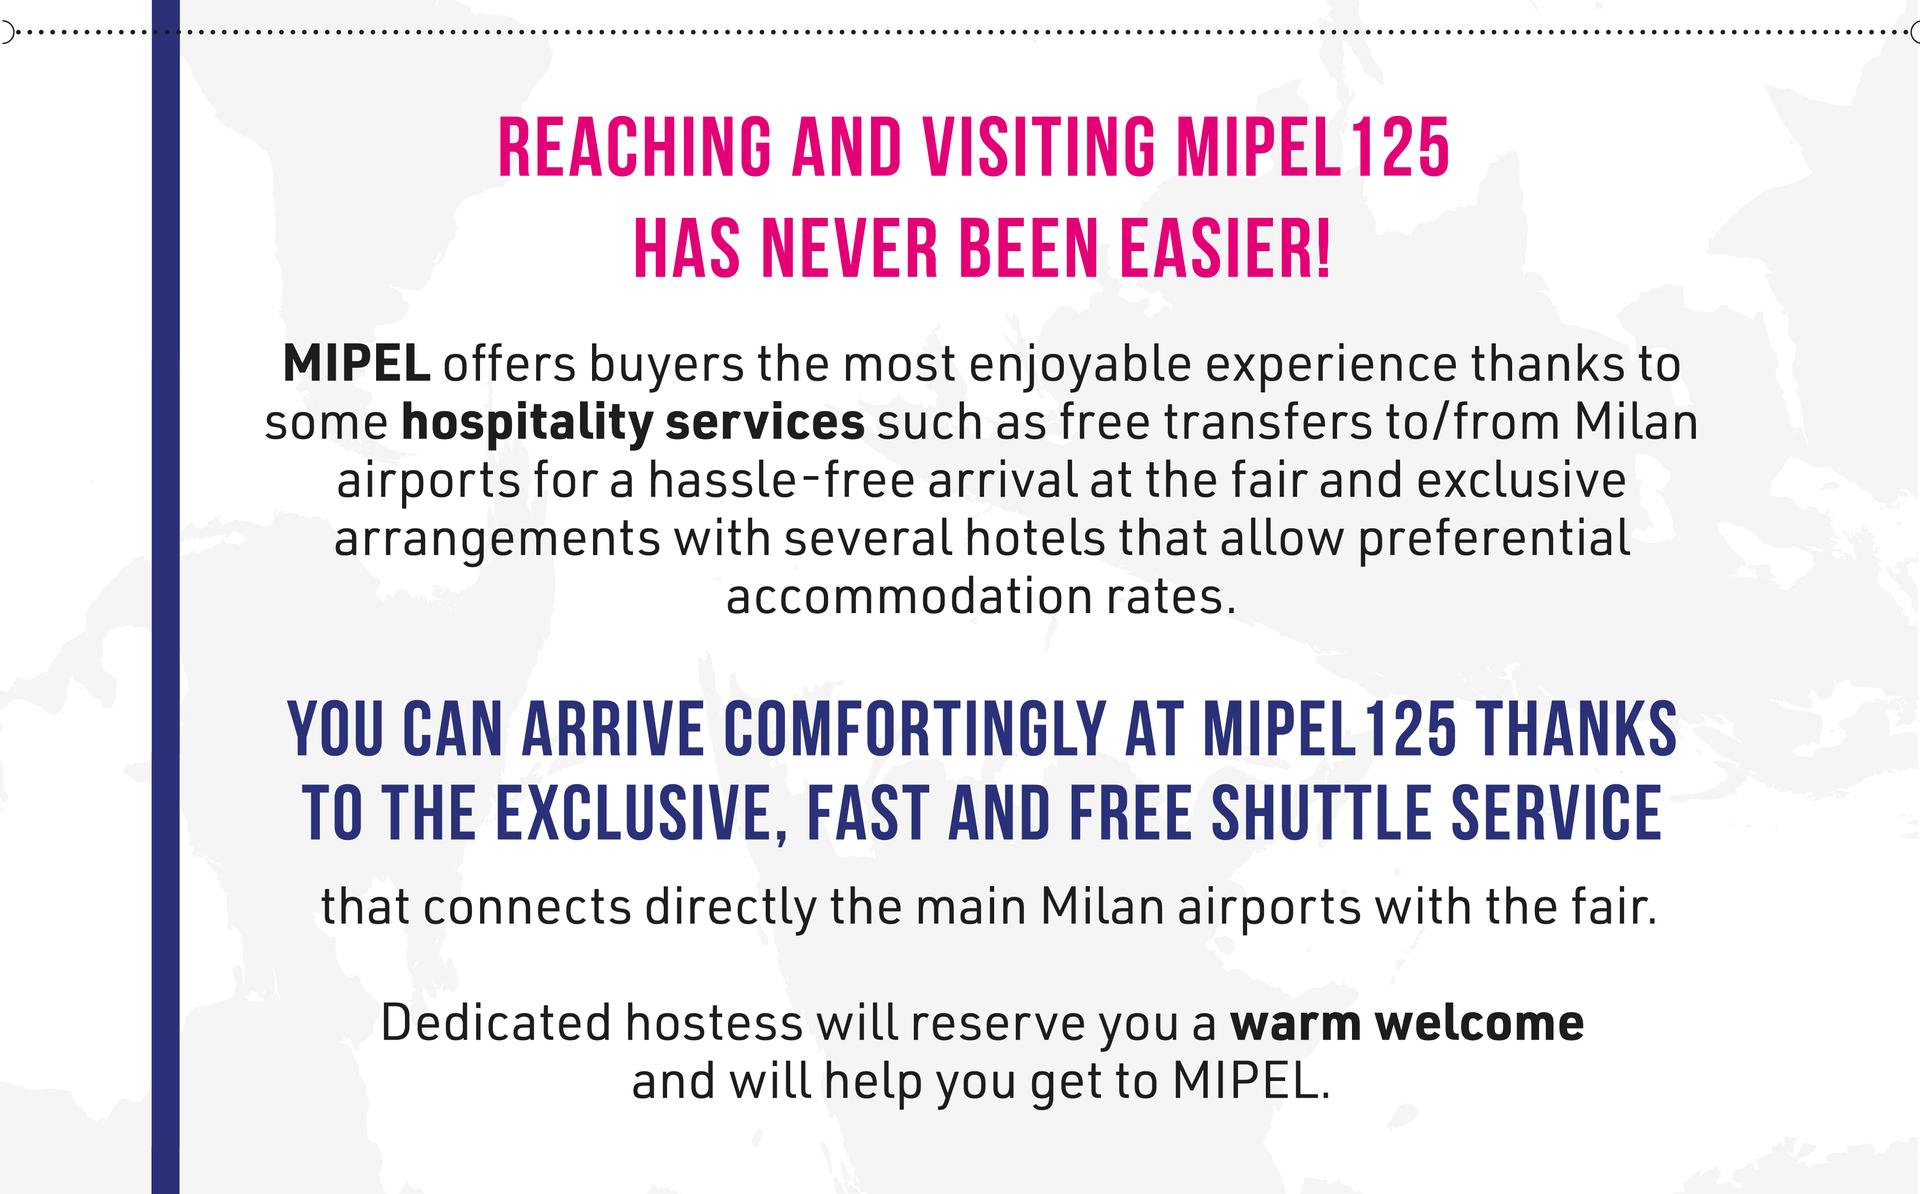 Reaching and visiting MIPEL125 has never been easier: discover MIPEL hospitality services: free shuttle and accomodation agreements!